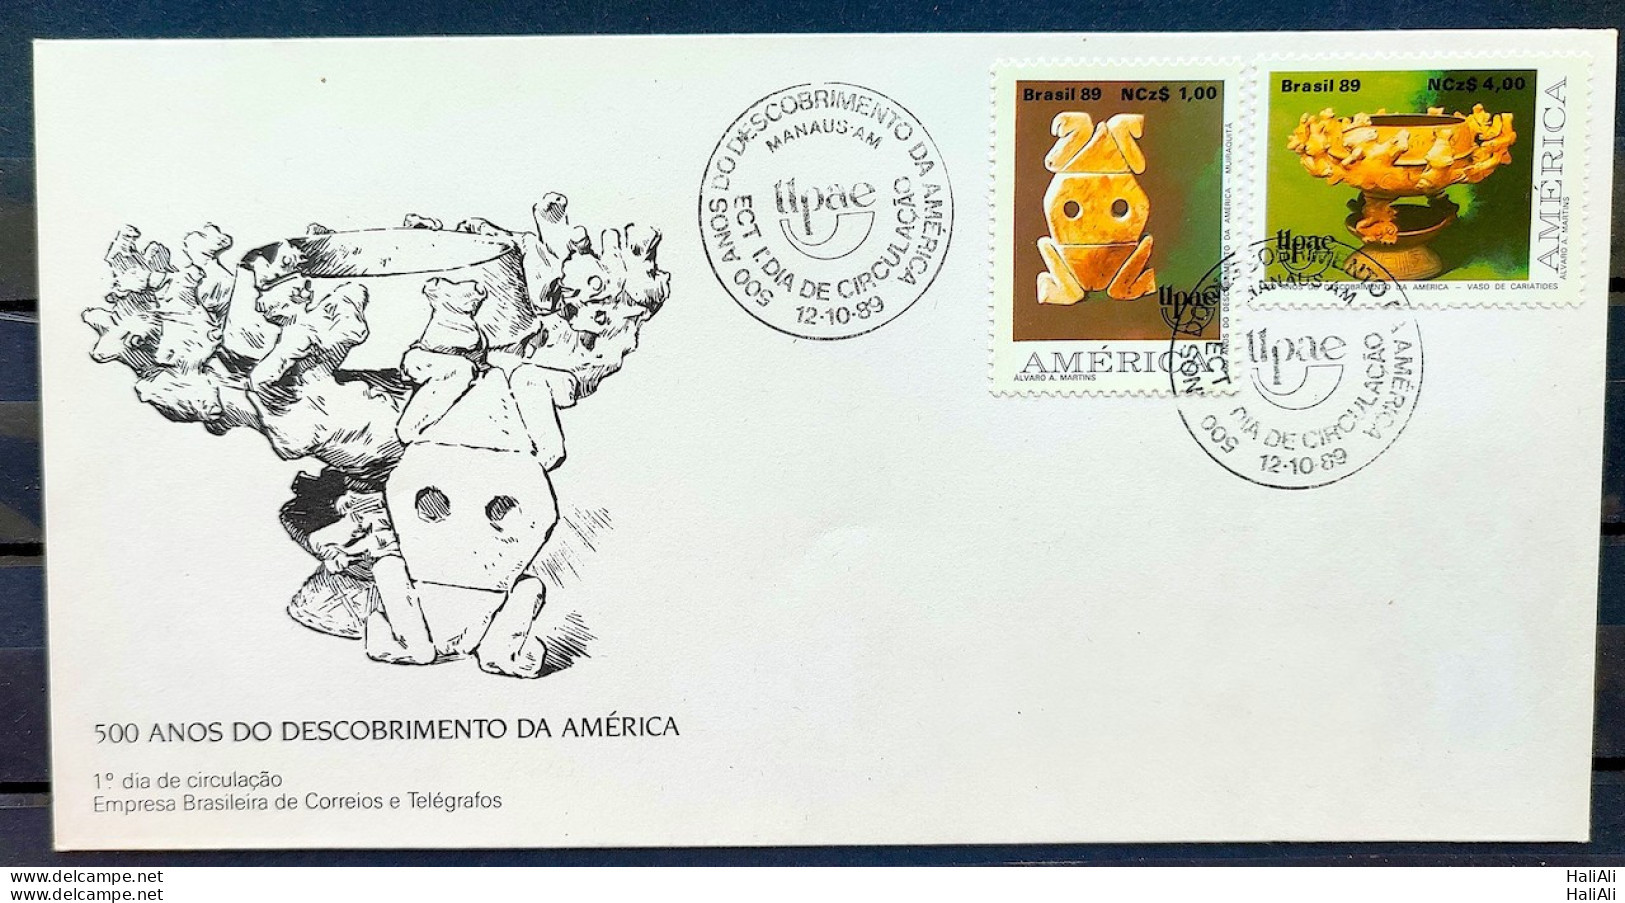 Brazil Envelope FDC 480 1989 Discovery Of America Indian CBC AM 02 - FDC